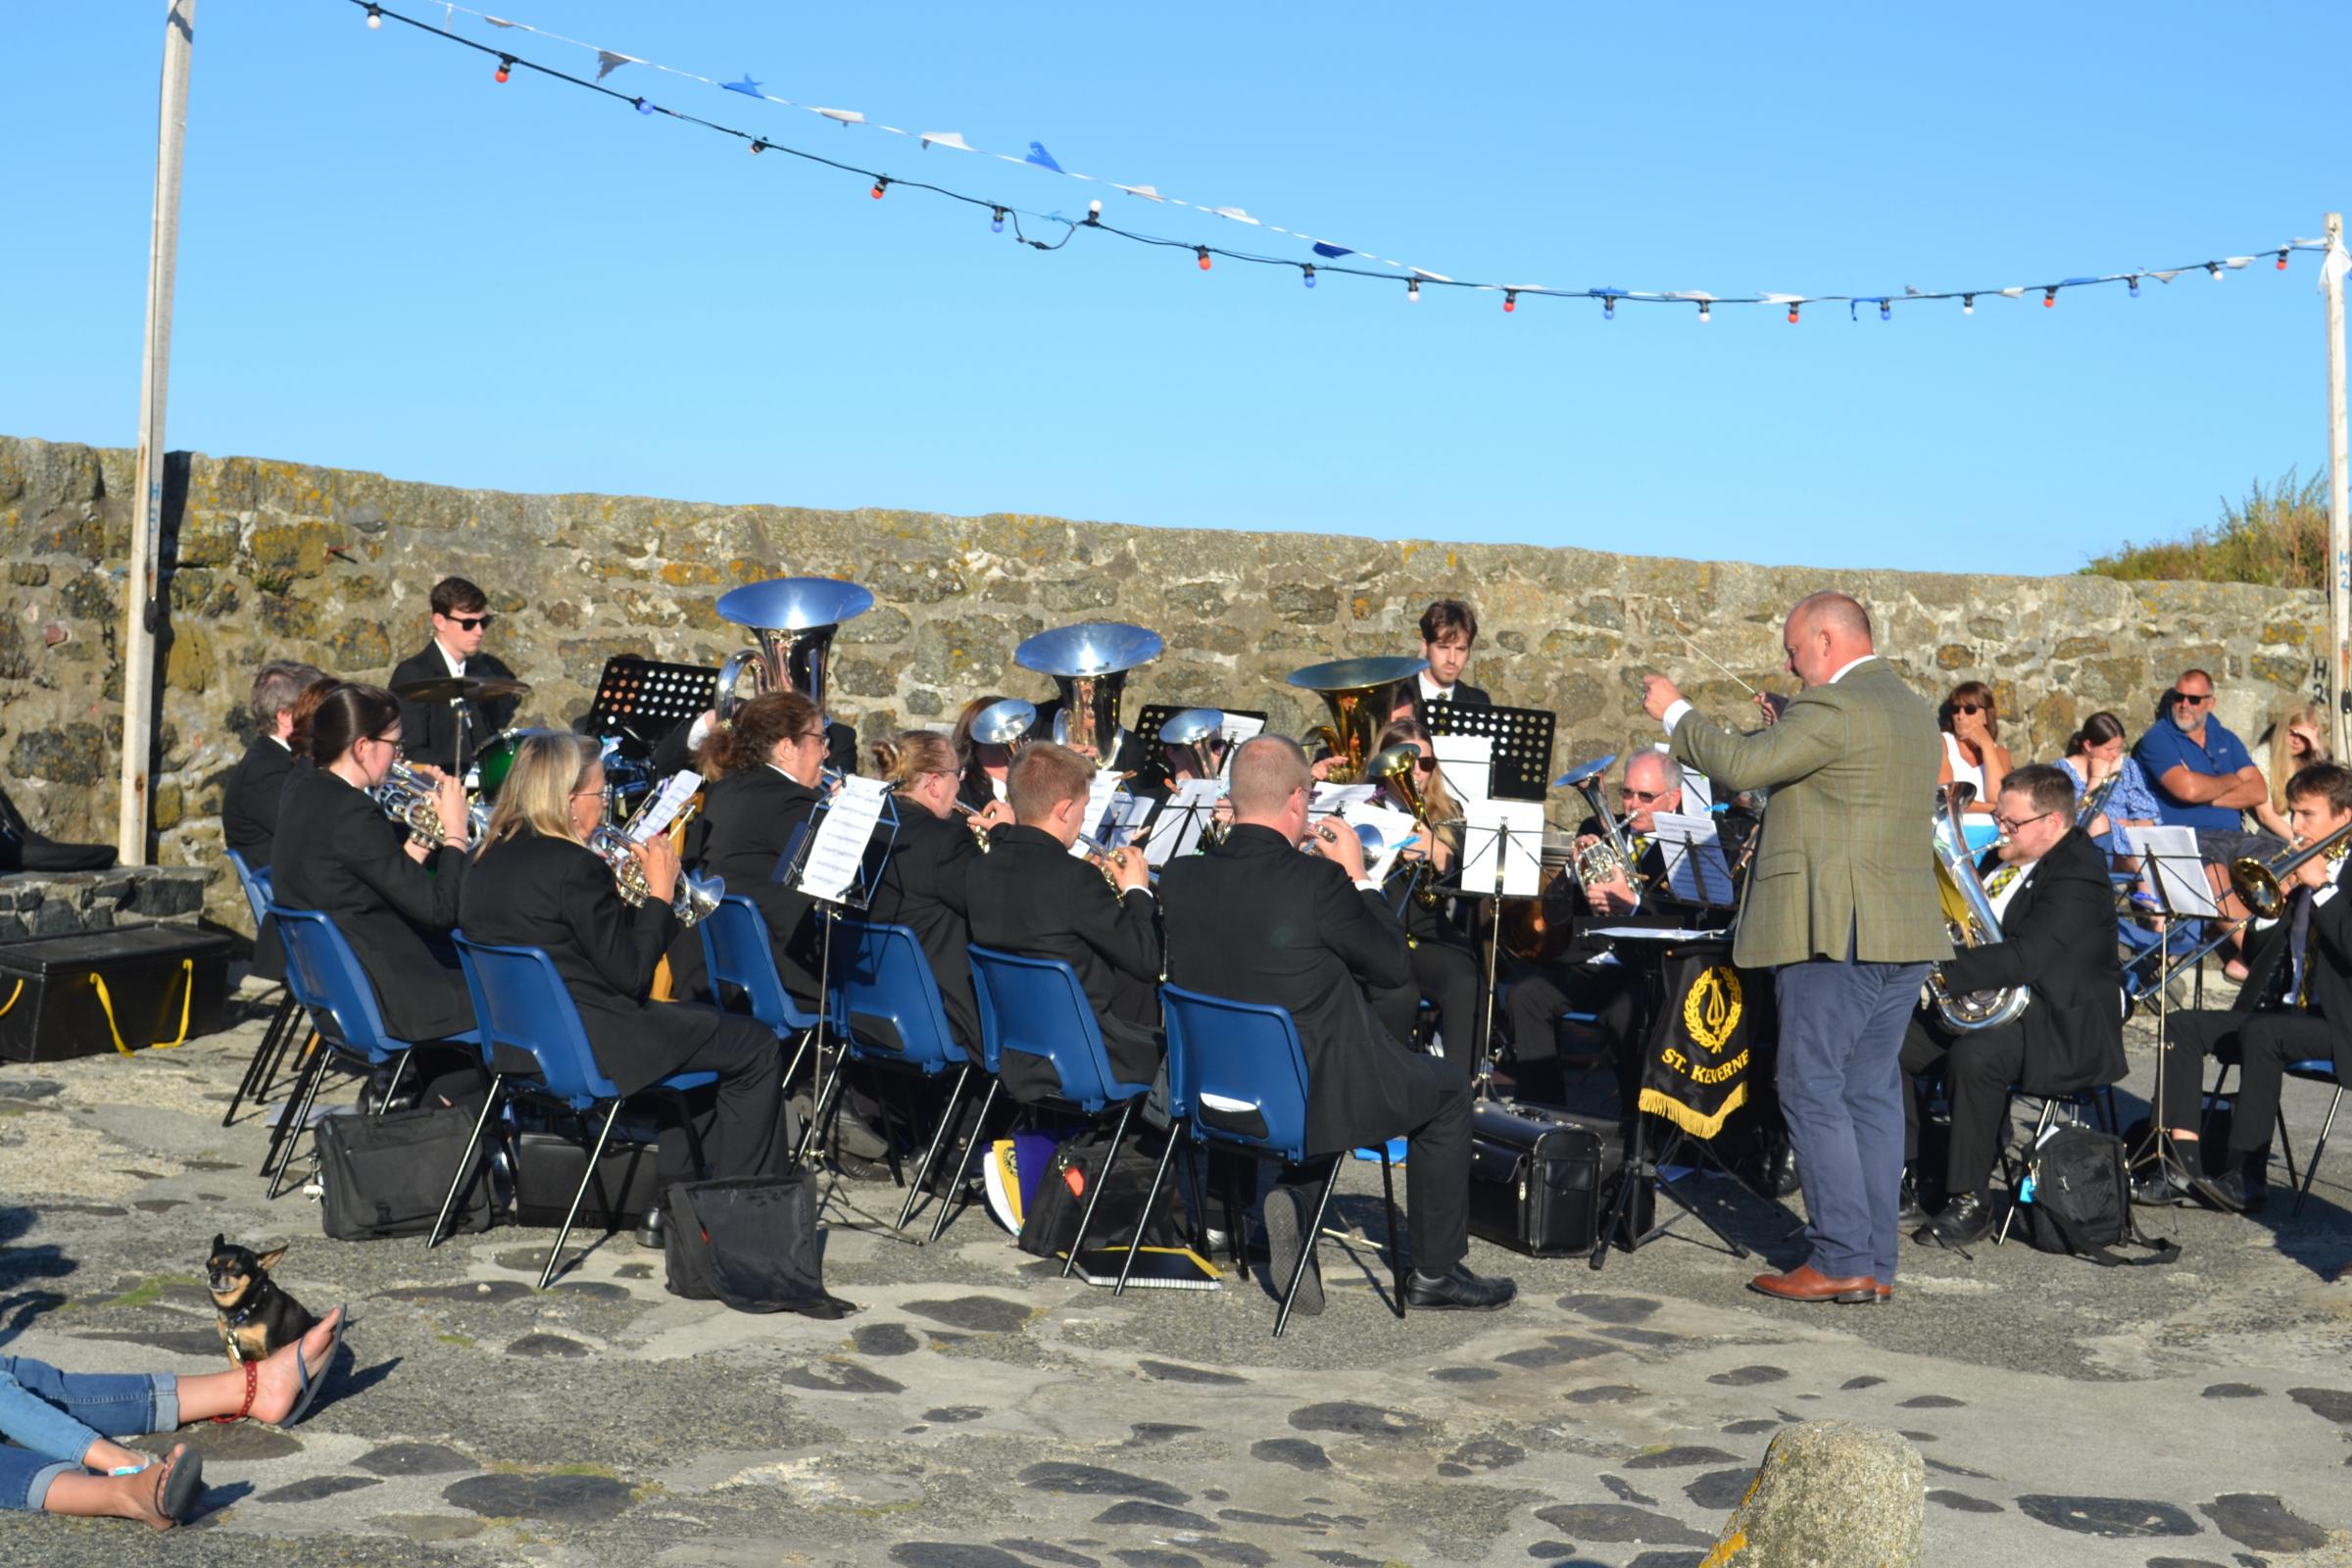 St Keverne Town Band conducted by Karl Long